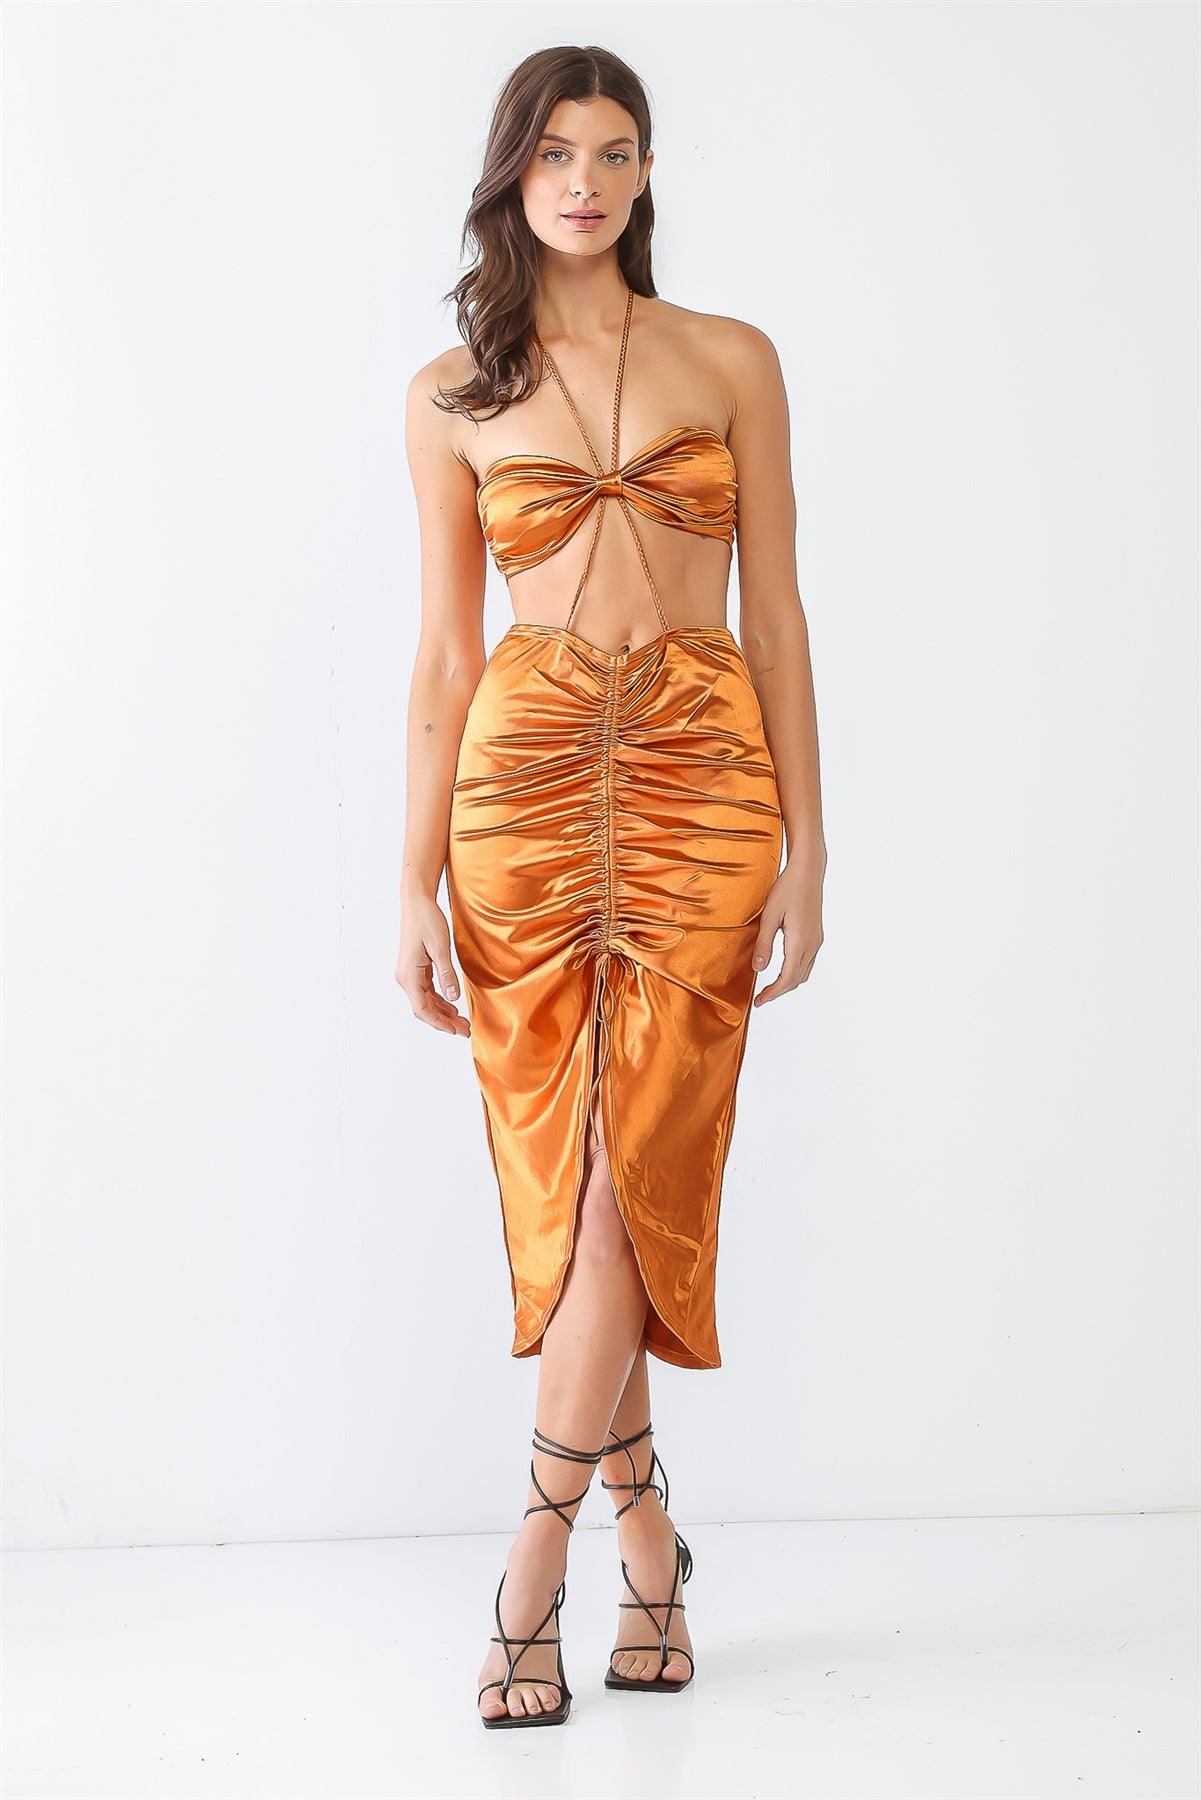 Copper Satin Bow Crop Top & High Waist Ruched Midi Skirt With Criss-Cross Strap Set /3-2-1